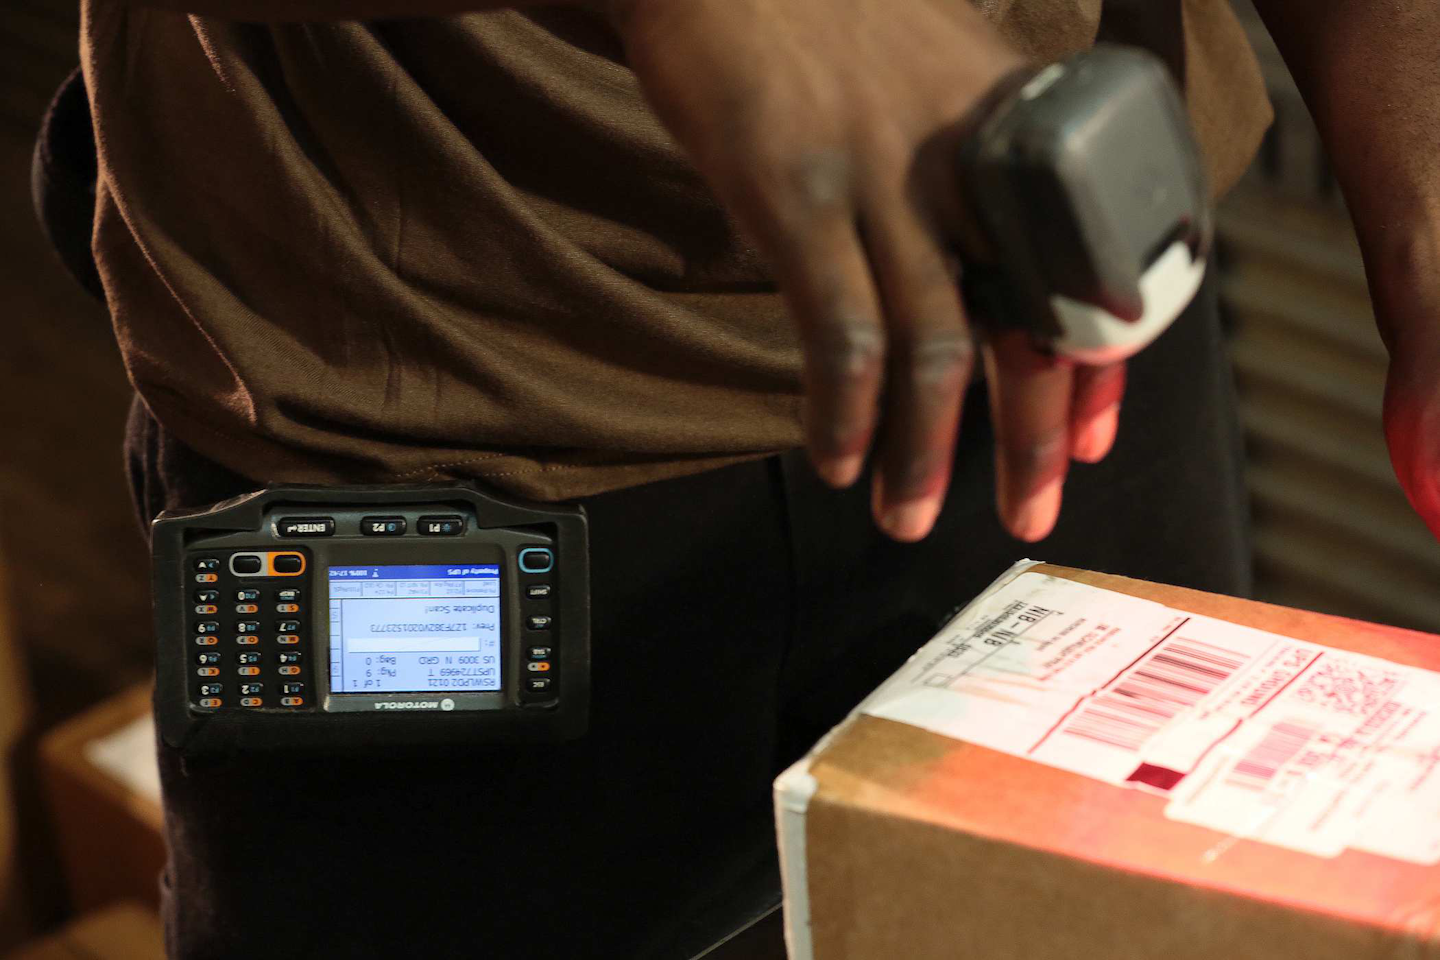 UPS deploys new packing, sorting scanning device Commerical Carrier